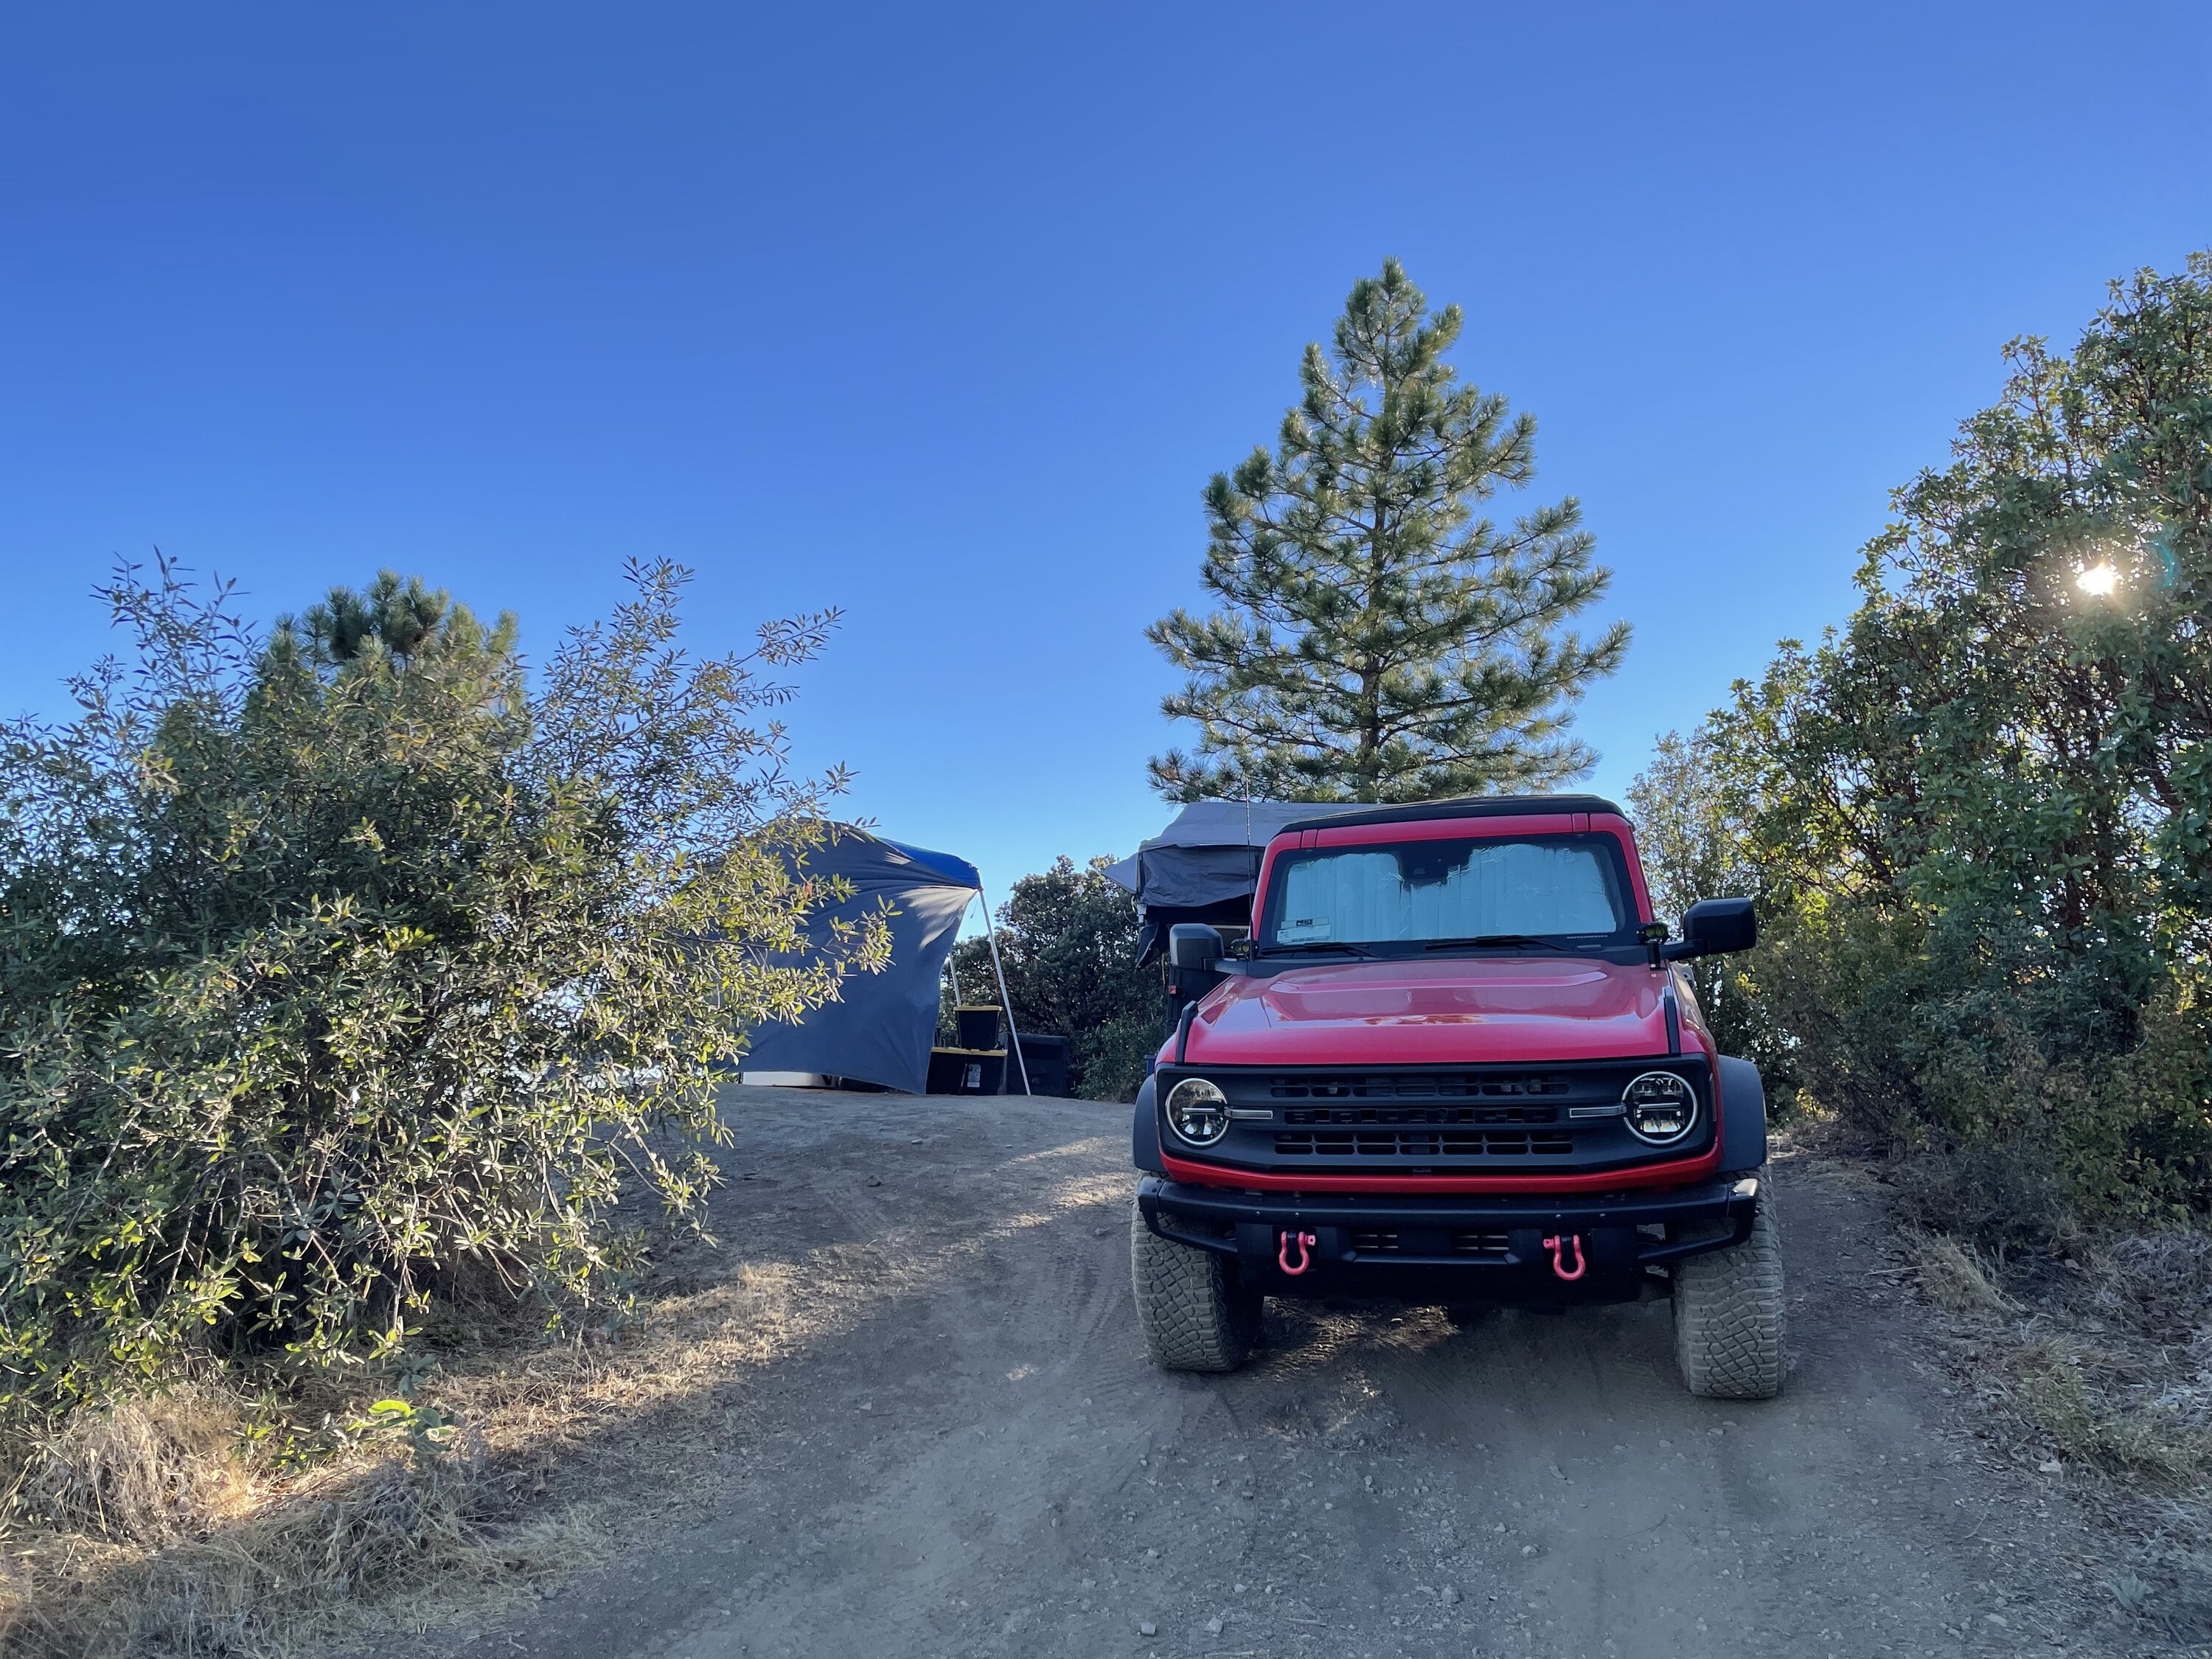 Ford Bronco Let's see your roof-top Tents and camping setups! 552517A6-D548-4EDB-8F19-5442E11CE65C